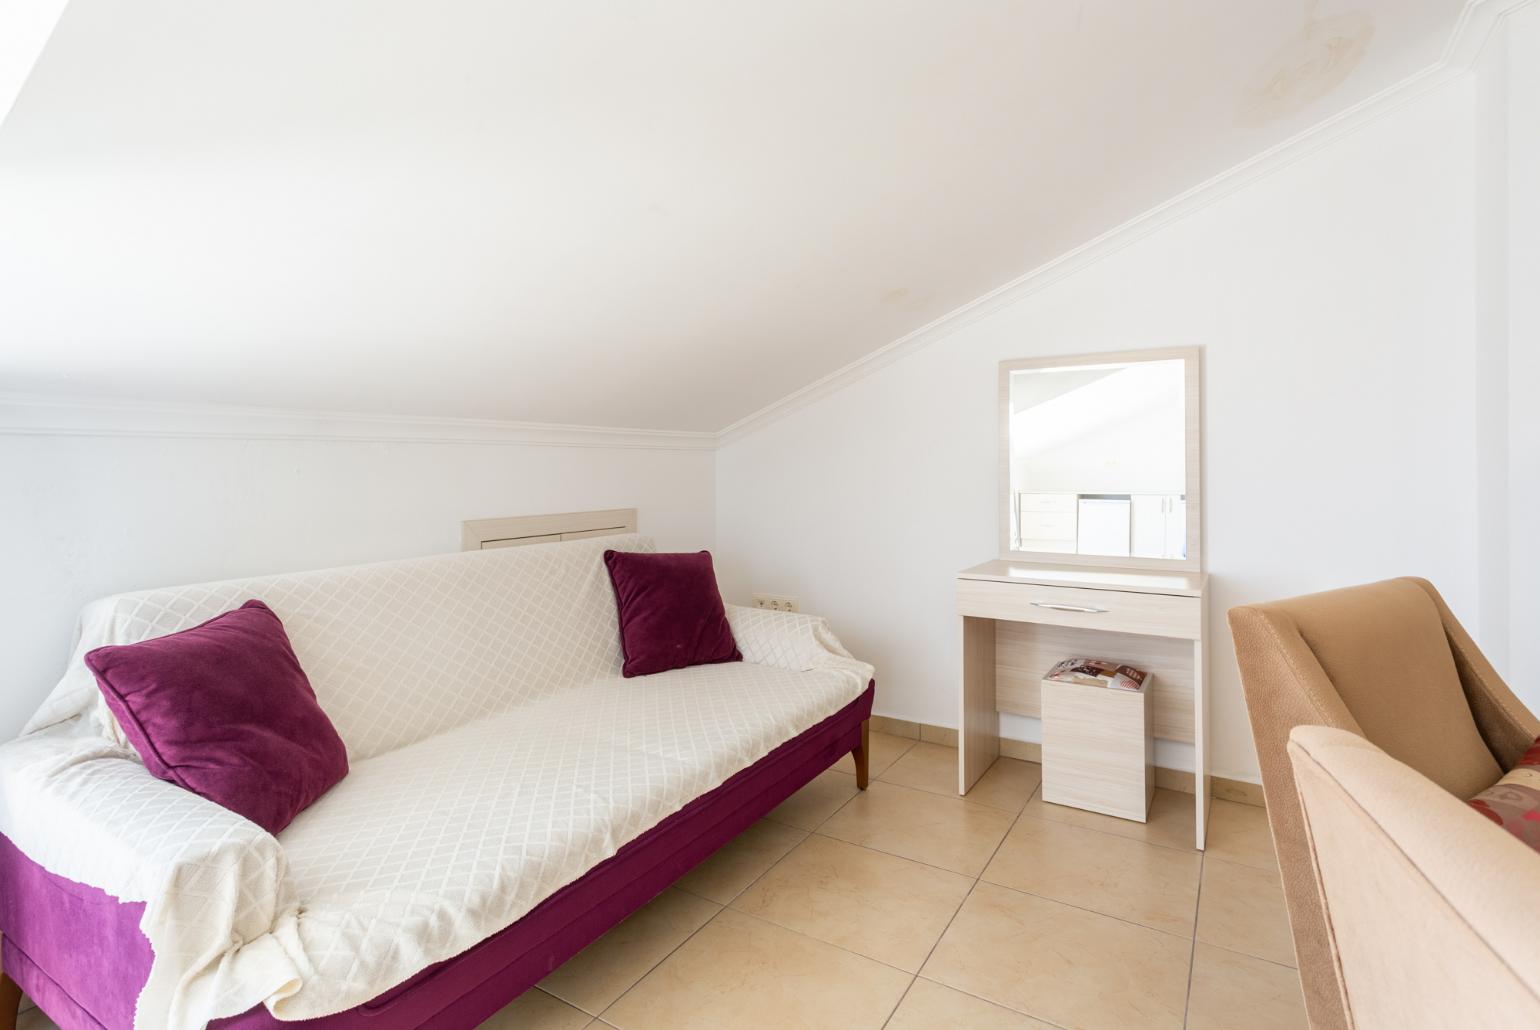 Double bedroom with en suite bathroom, A/C, seating, ornamental fireplace, and balcony access